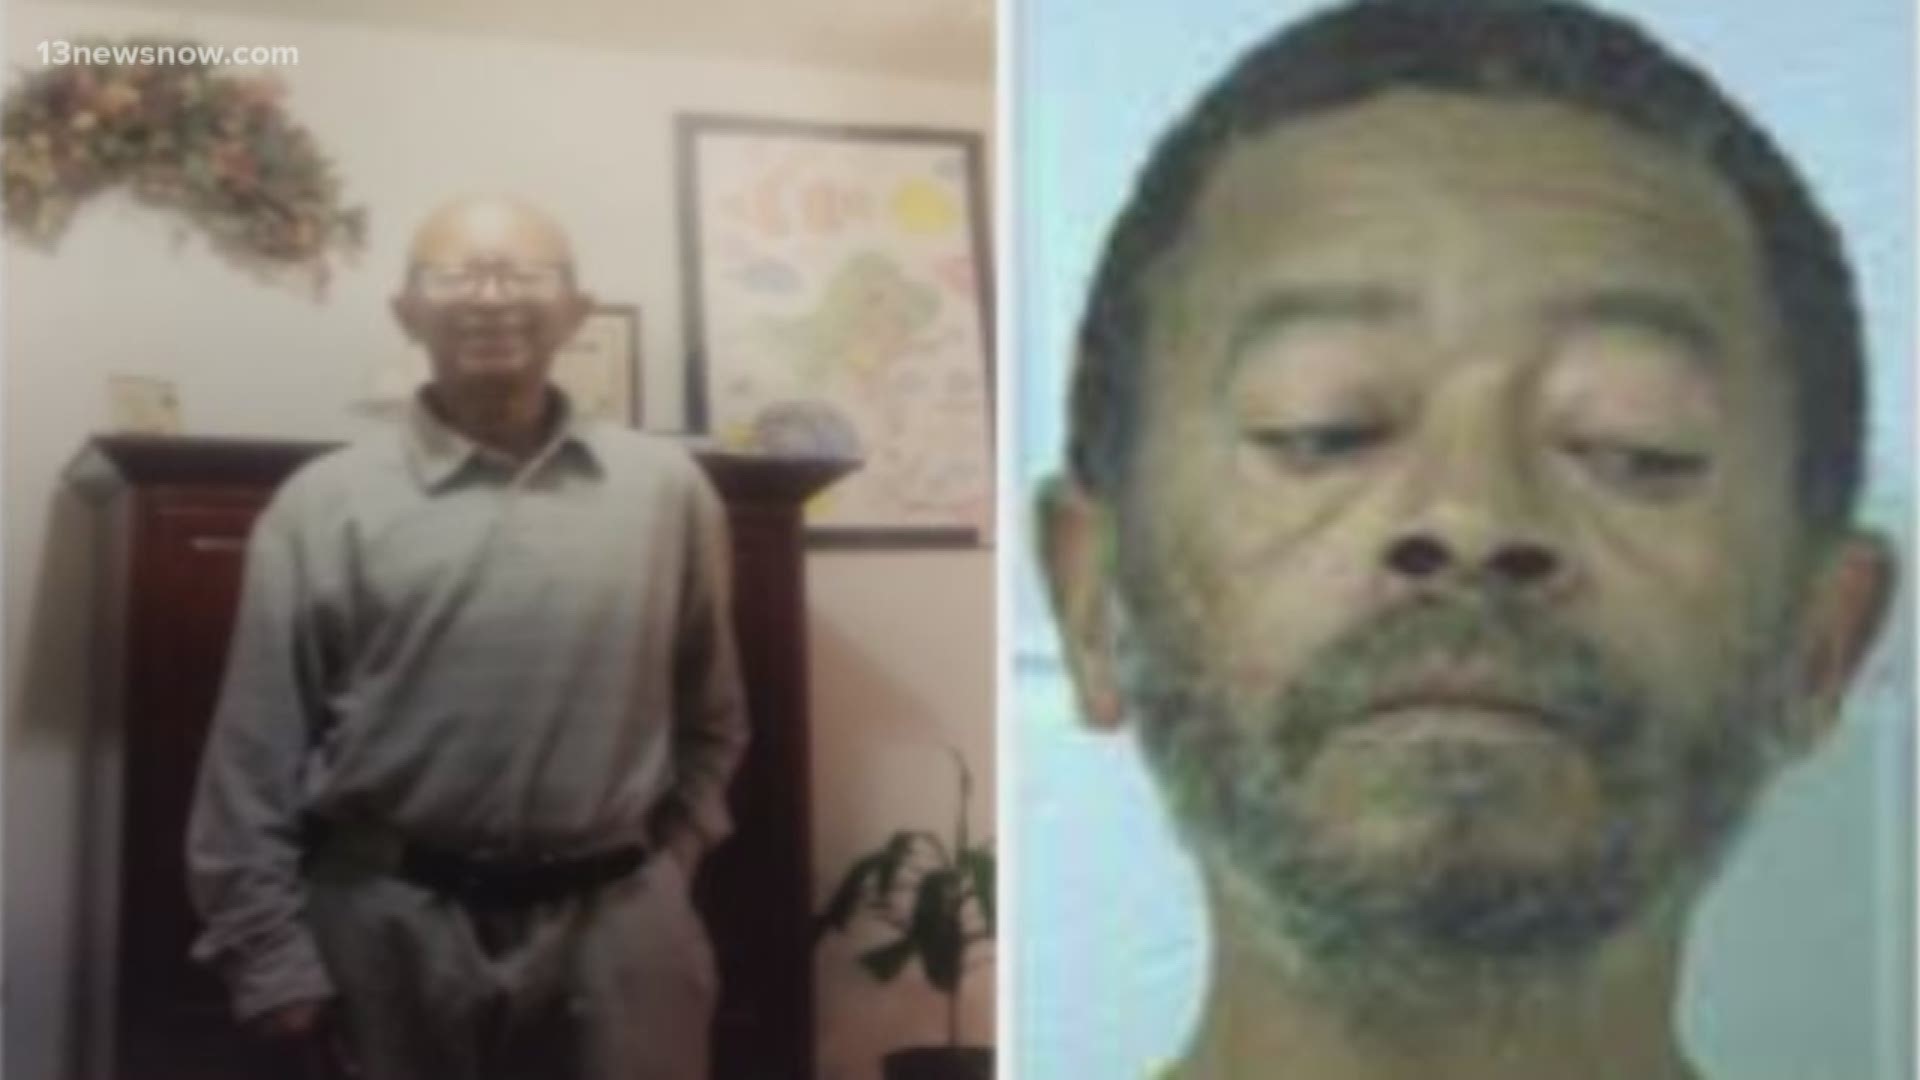 Raymond Benjamin  Holmes, 65, was last seen on February 23 when he checked out of the Washington Burgess Inn on Rt 33.